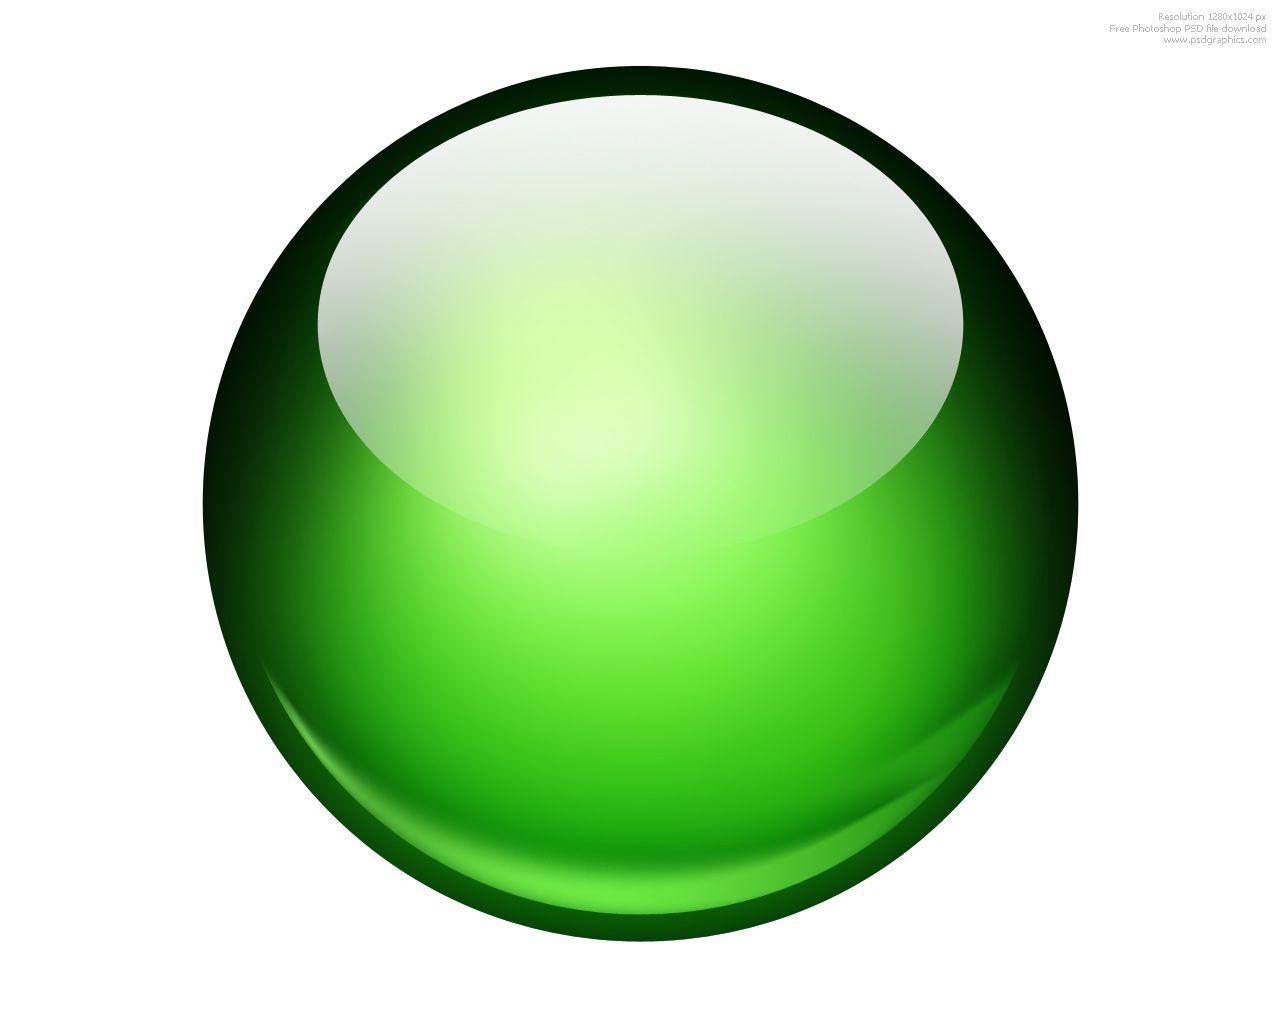 numerology number 1 green orb